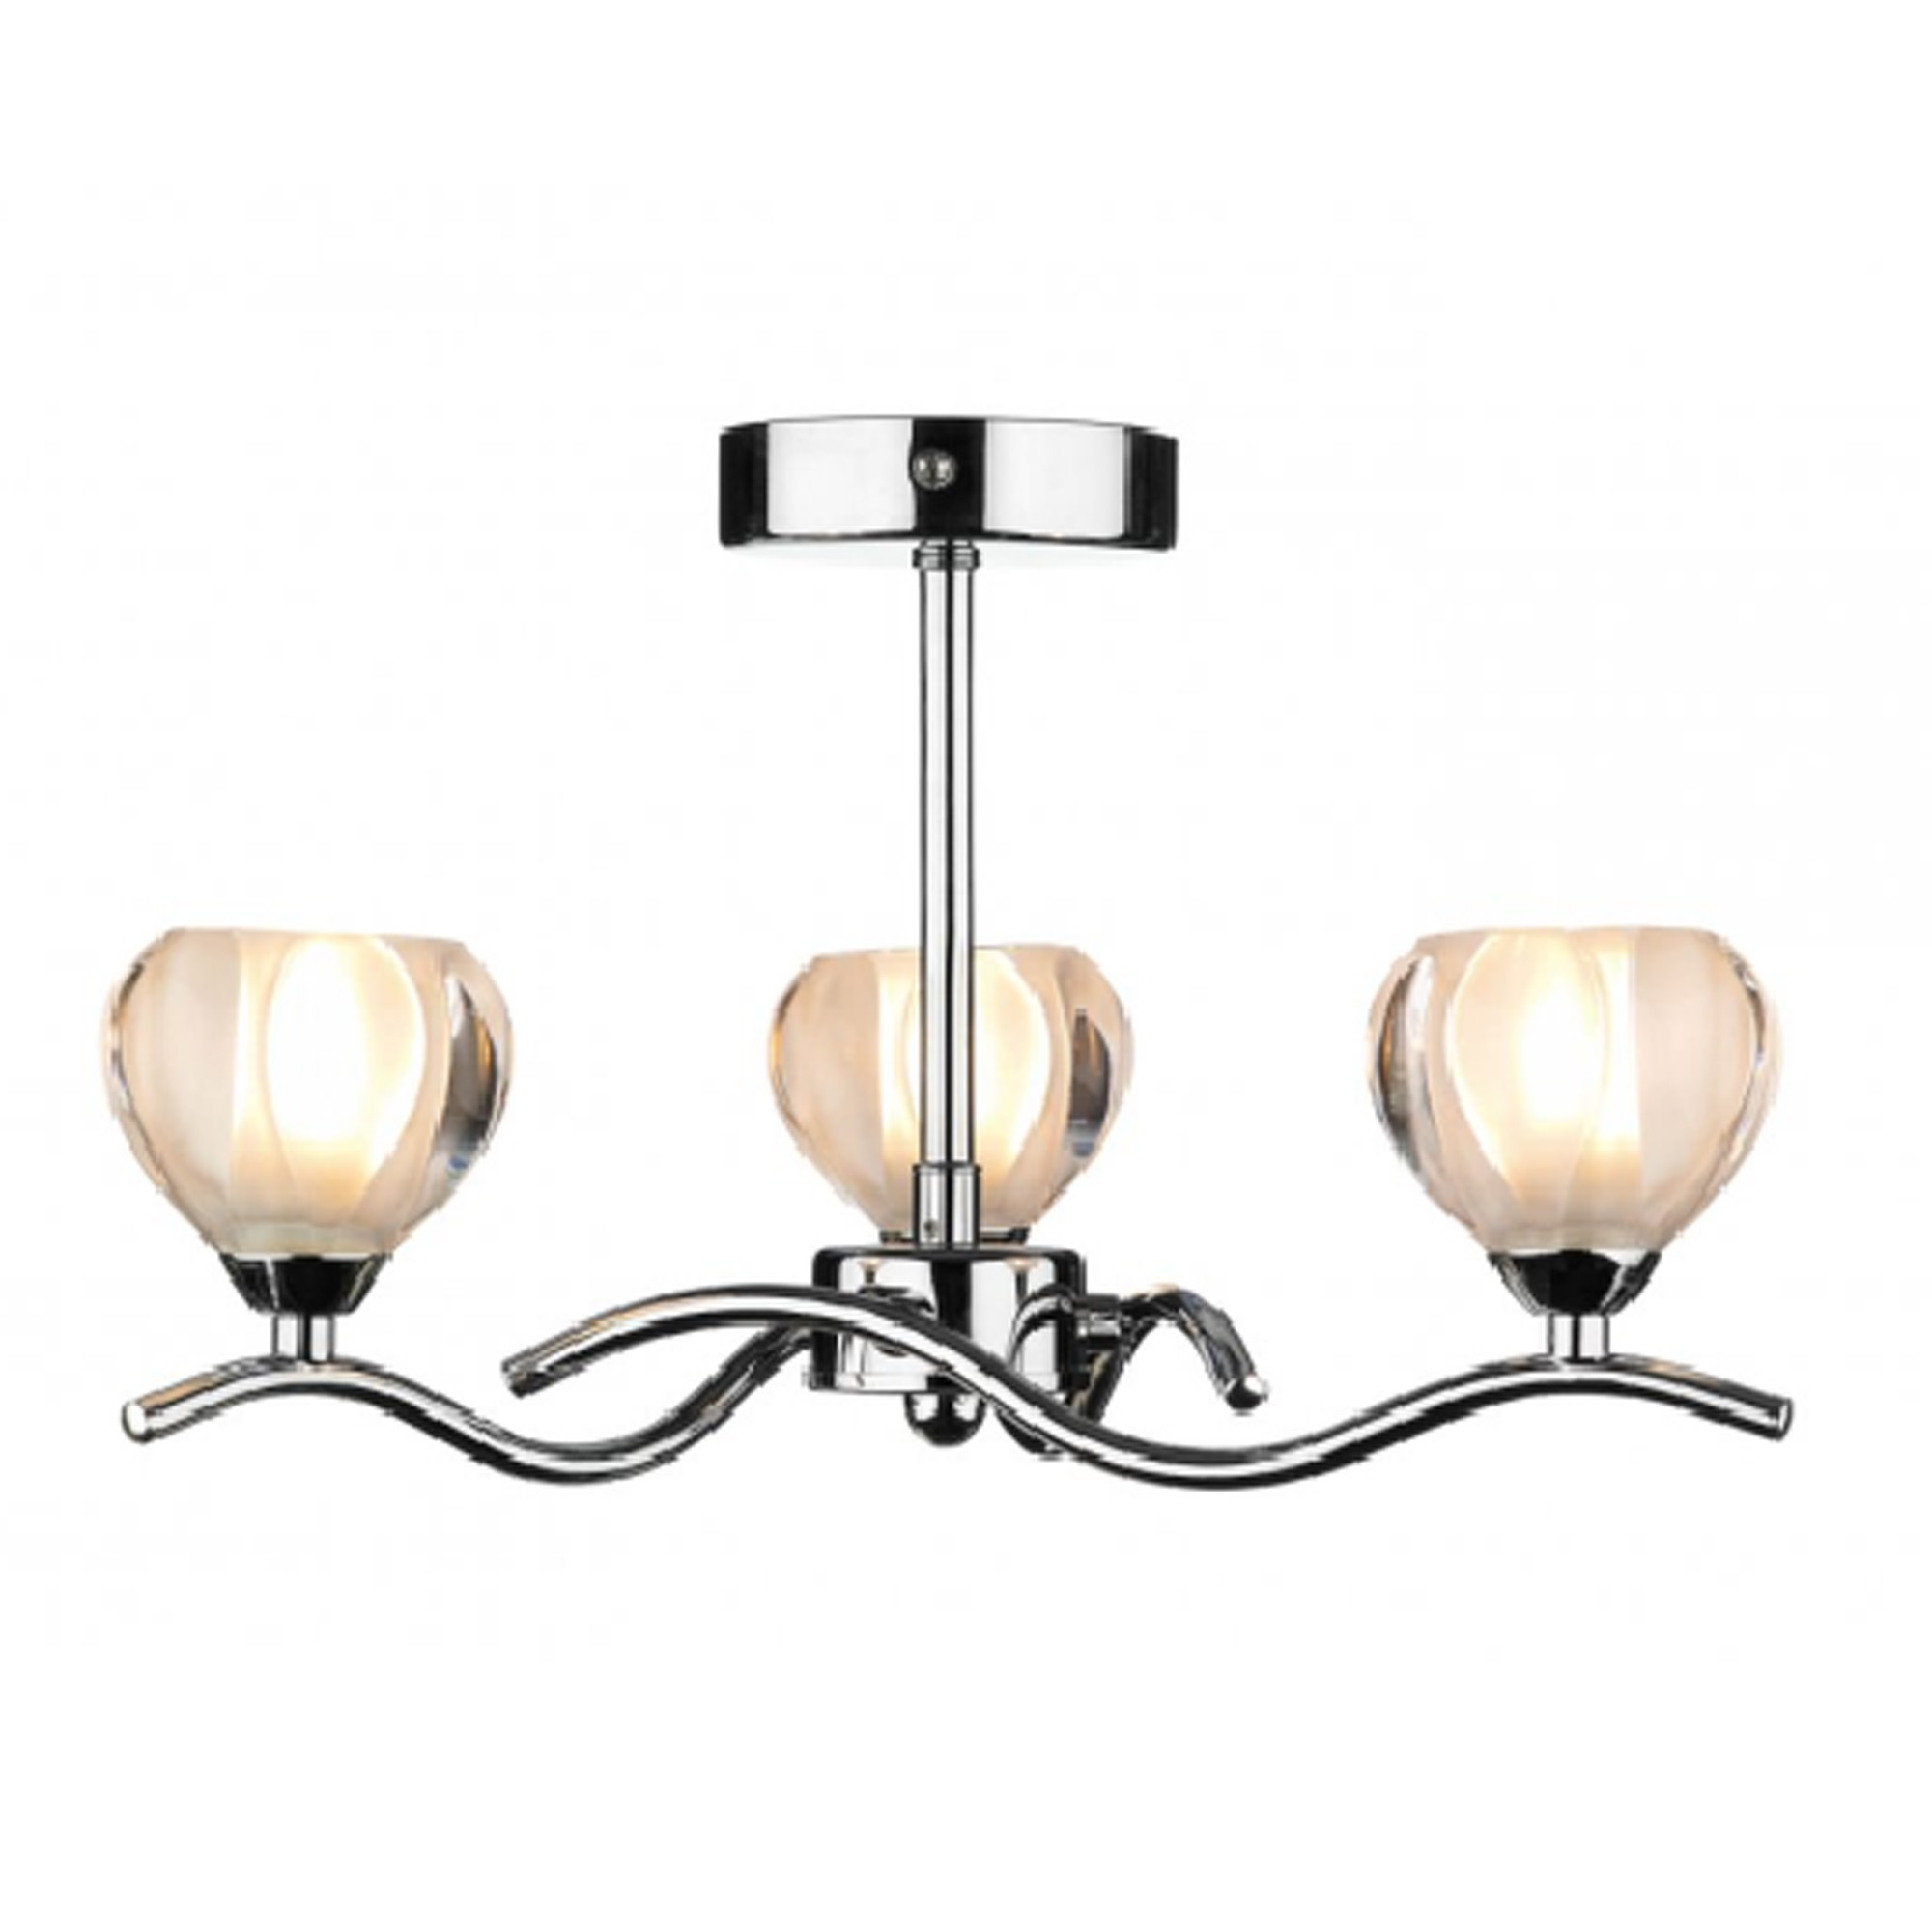 Hot-selling ceiling lamp HL-9523-3X-1.Hot-selling ceiling lamp HL-9523-3X   2.Fit for  Home Furniture Decoration, Guest Room.   3. Shipping port: Shenzhen, Zhongshan    4.Nice appearance, favorable optical design